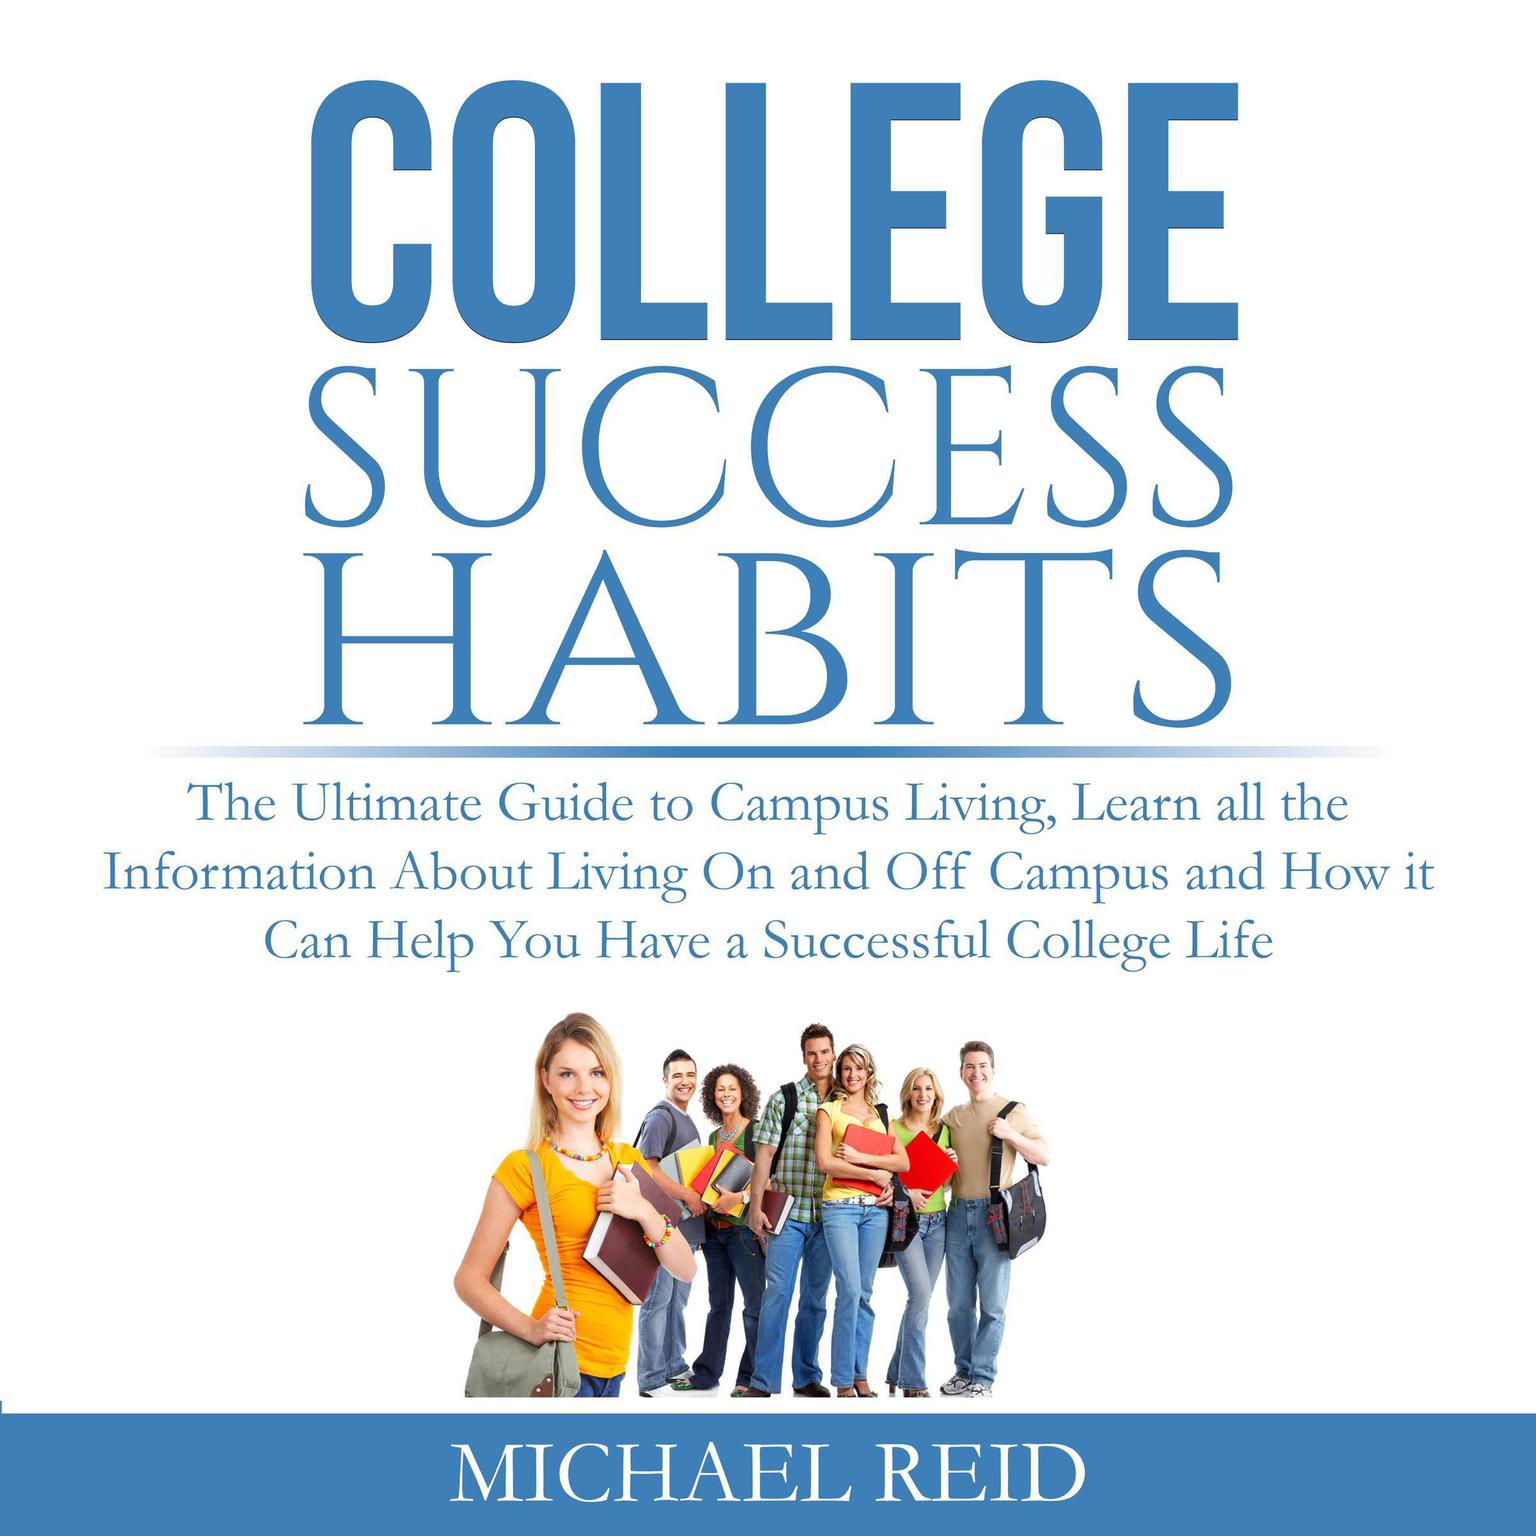 College Success Habits: The Ultimate Guide to Campus Living, Learn all the Information About Living On and Off Campus and How it Can Help You Have a Successful College Life. Audiobook, by Michael Reid